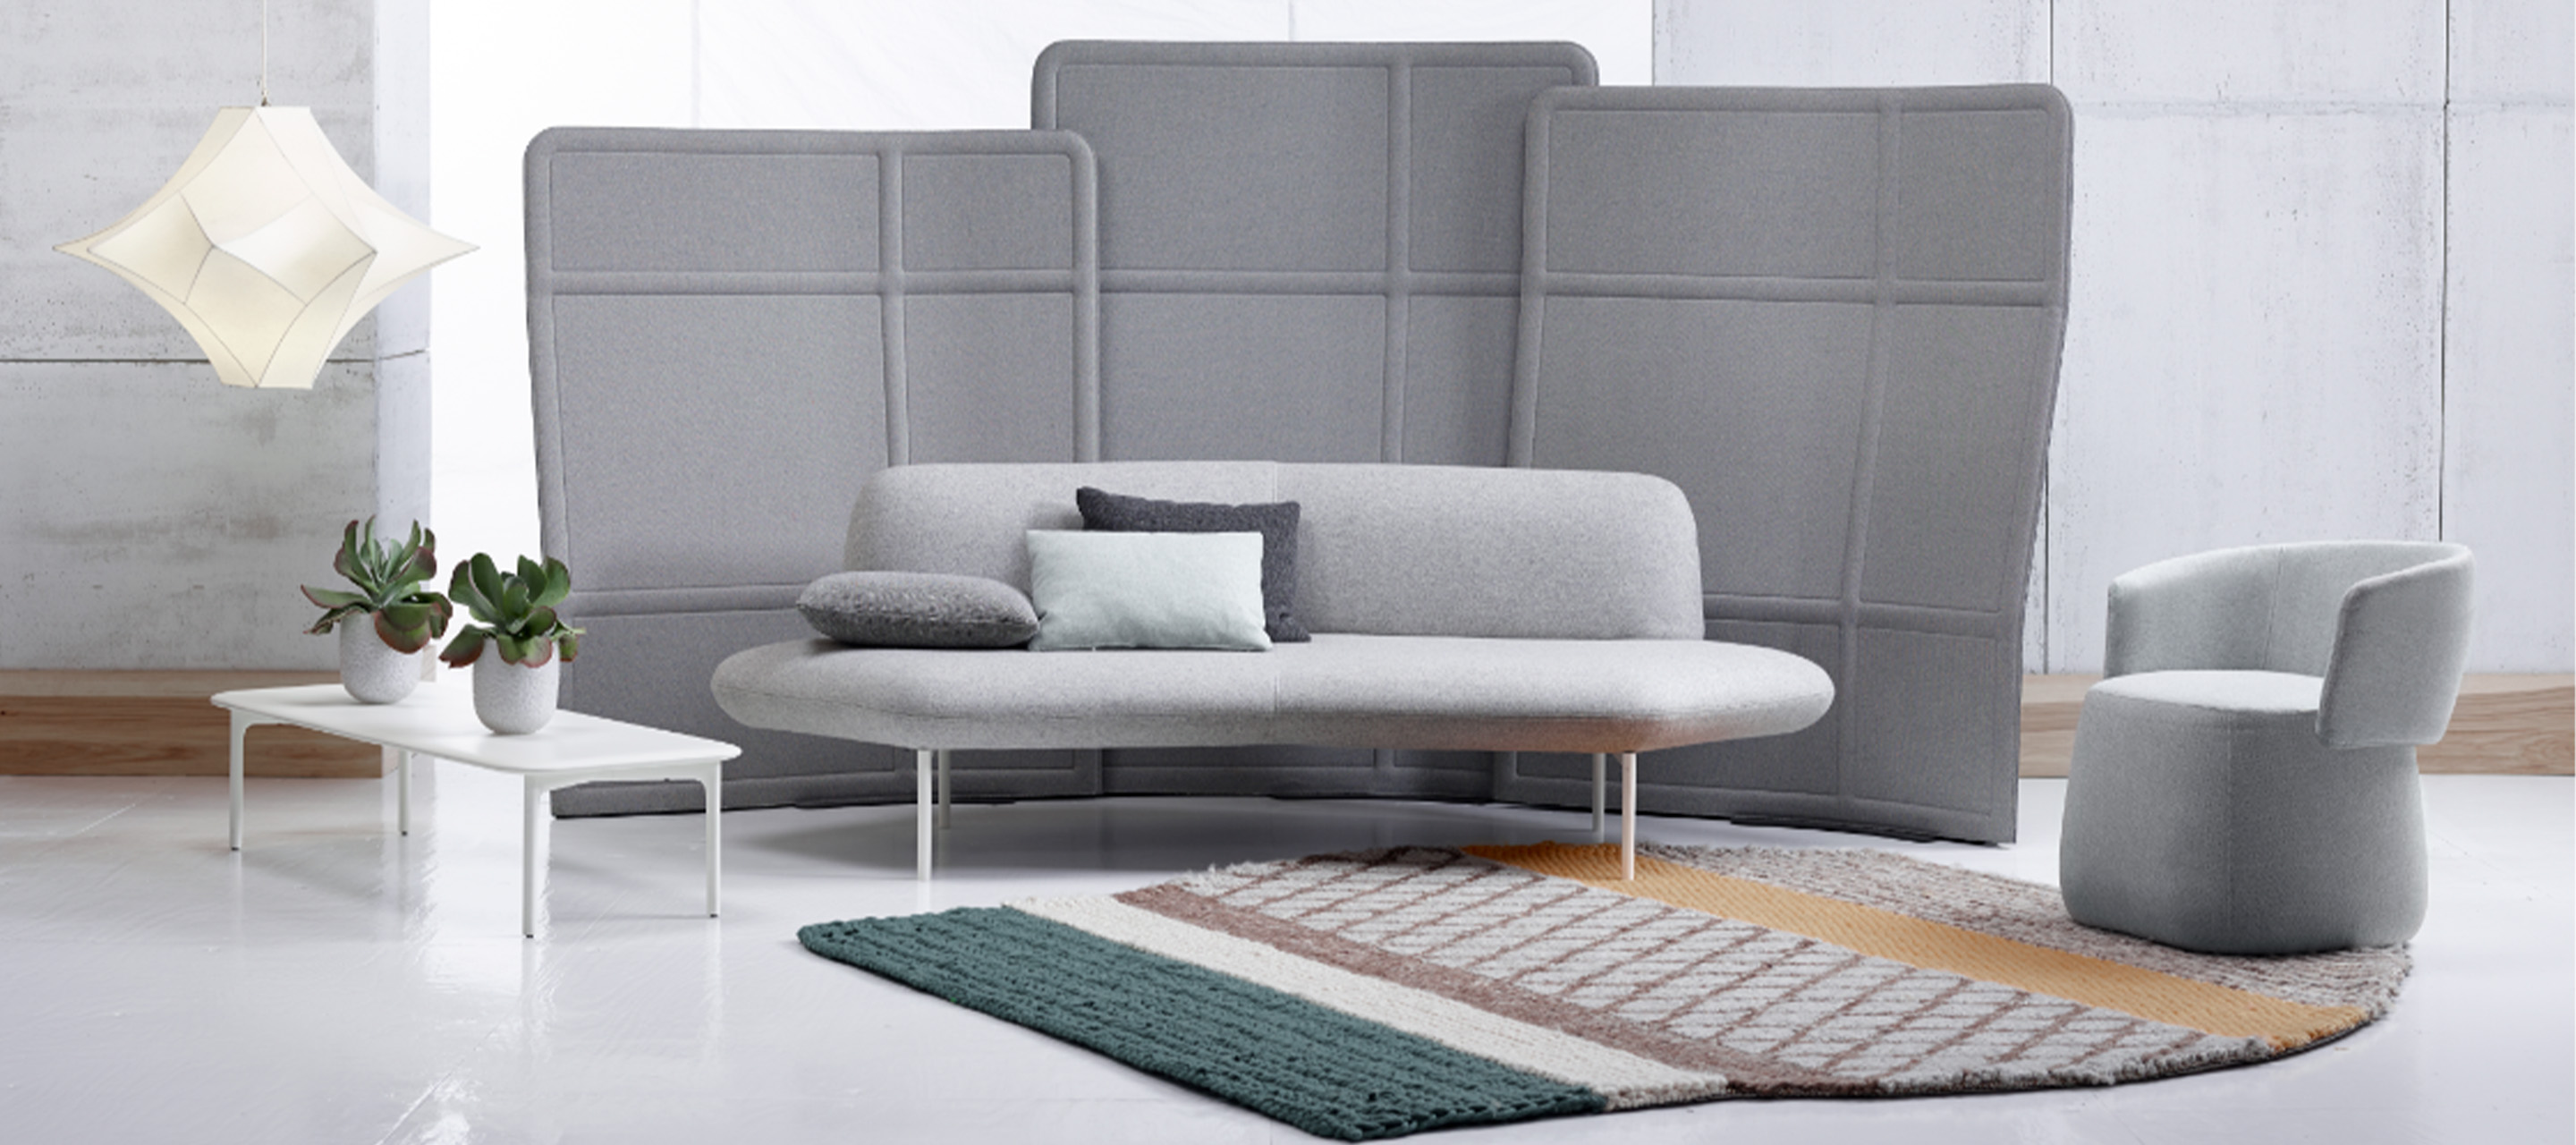 Haworth Openest lounge with chick pouf and GAN rug/